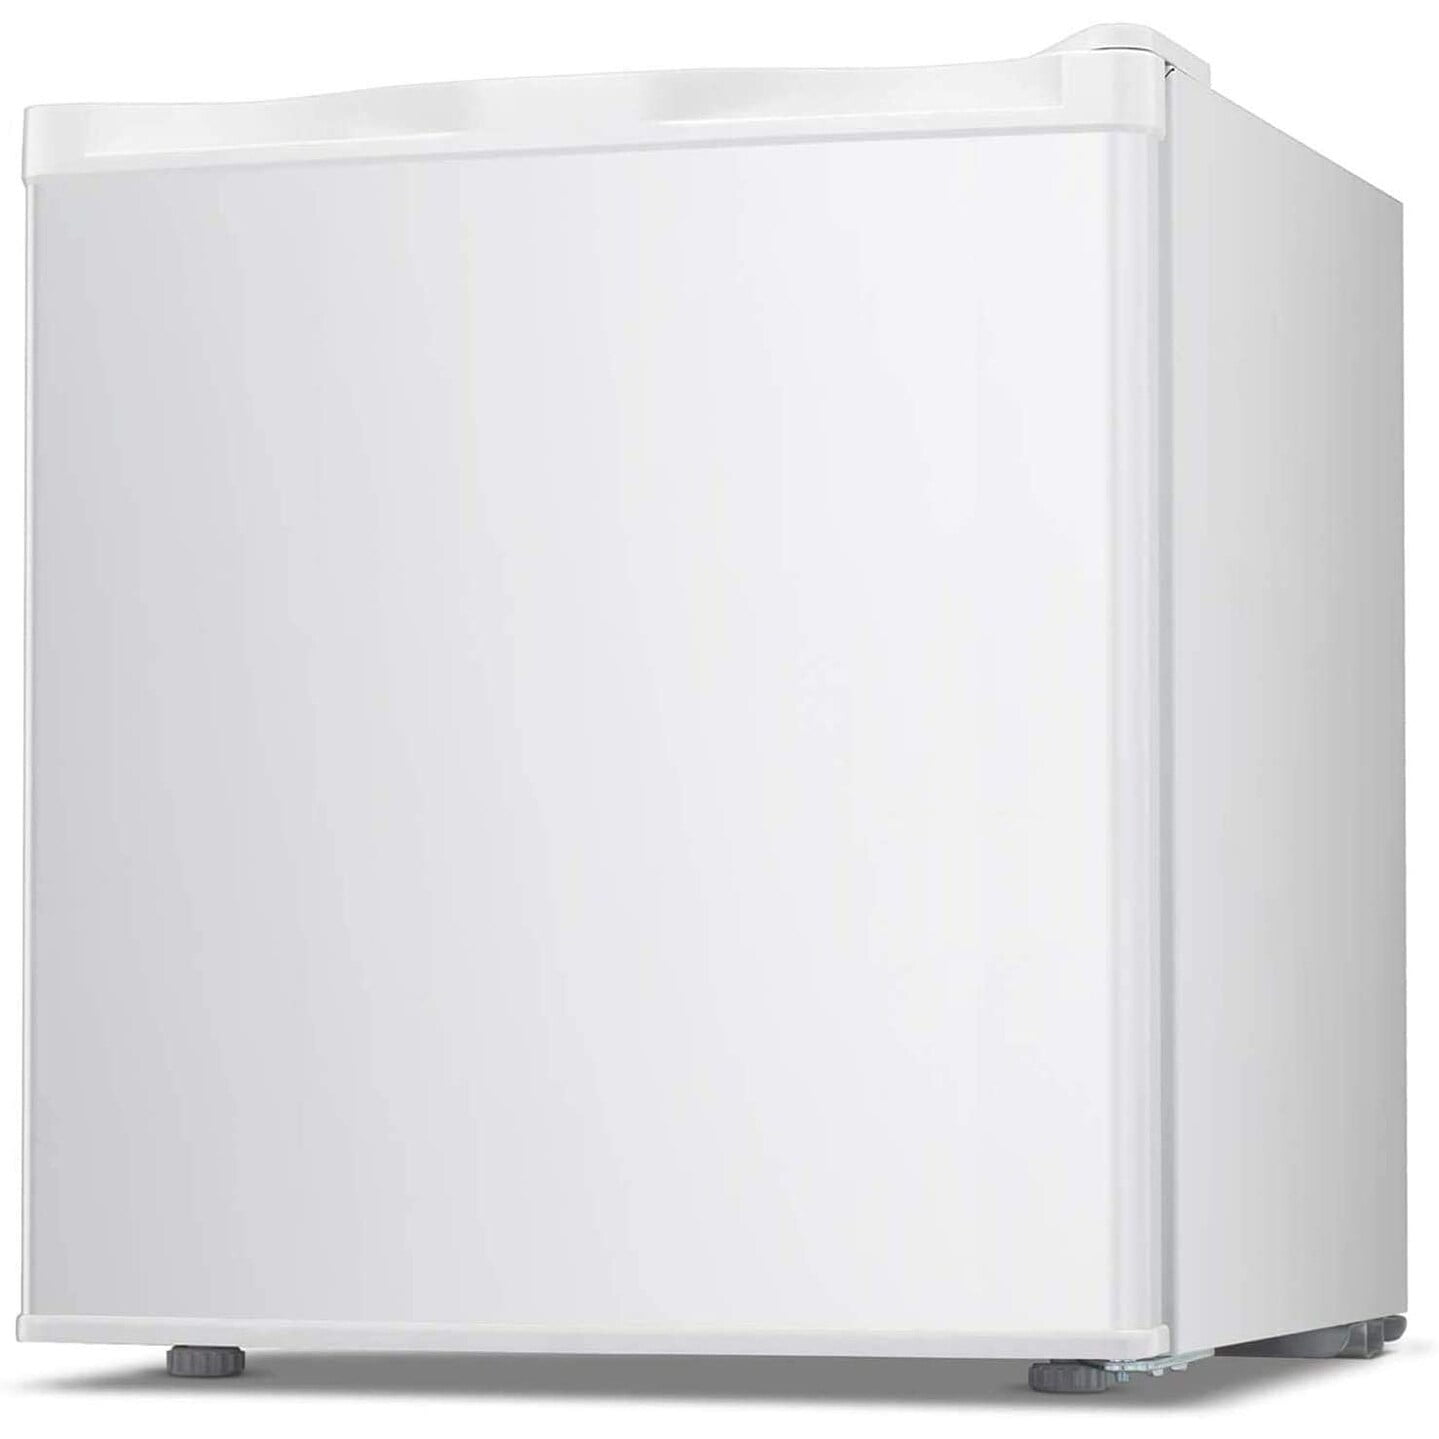 KISSAIR 1.1 Cu.ft Mini Freezer, Small Freezer with Removable Shelves,  Adjustable Thermostat, Reversible Door Hinge, For Home/Office/Kitchen/RV  (White)